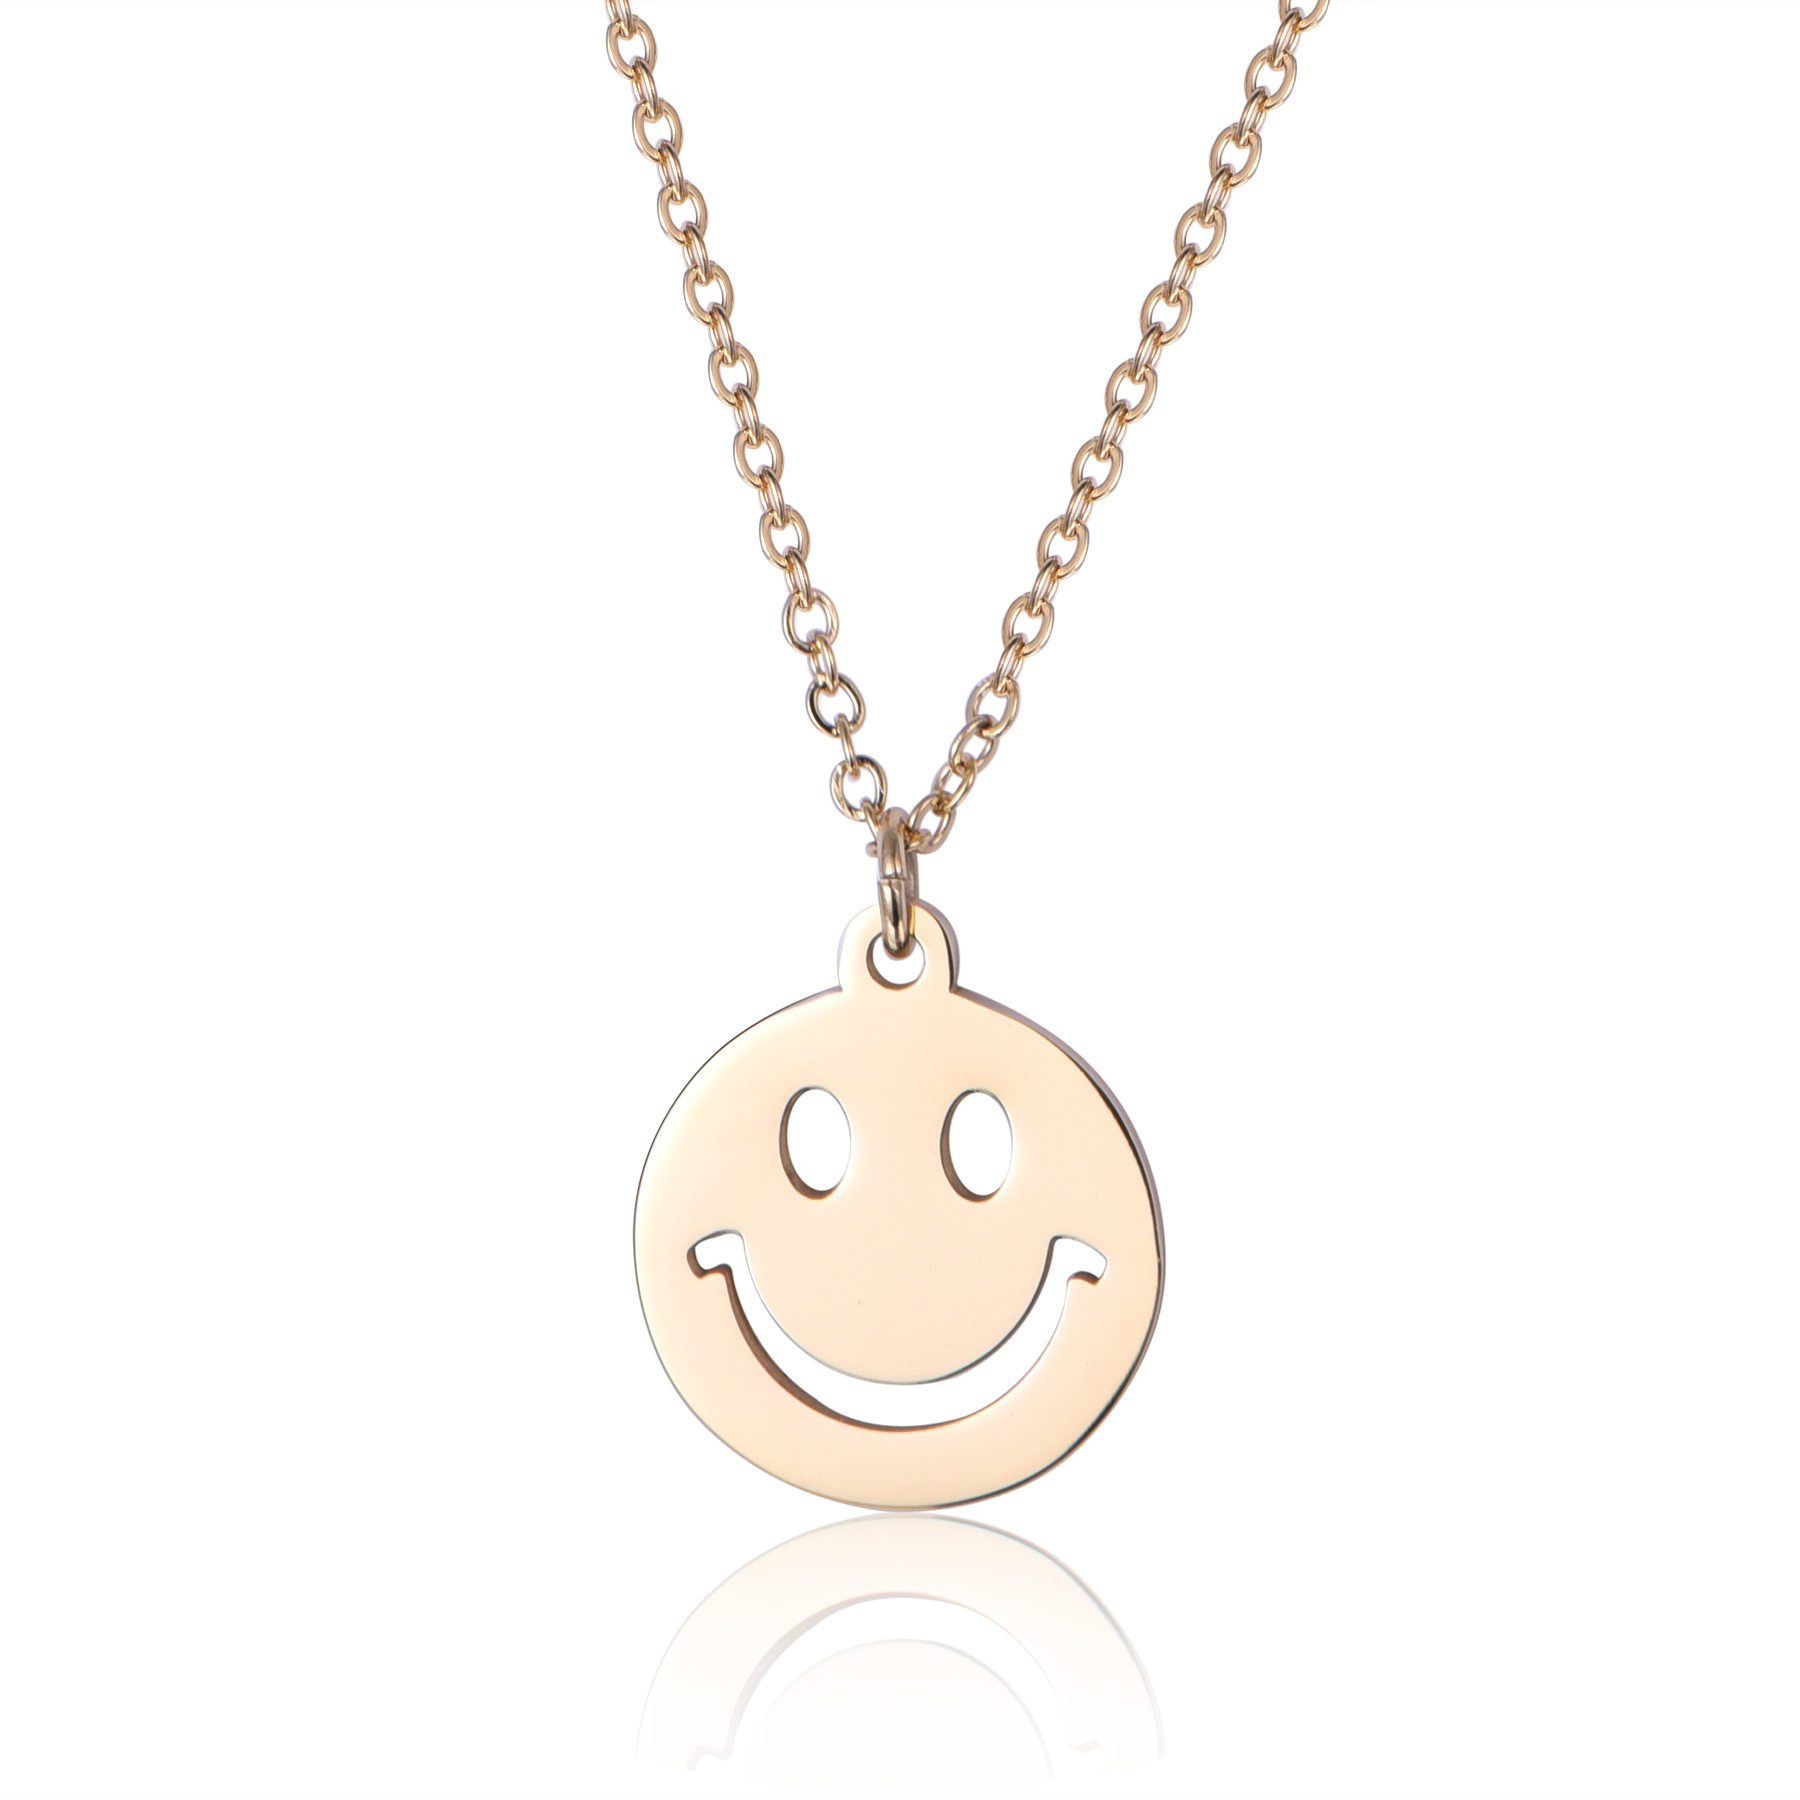 Stainless Steel Everyday Jewelry Smile Face Disc Necklace NR7-14